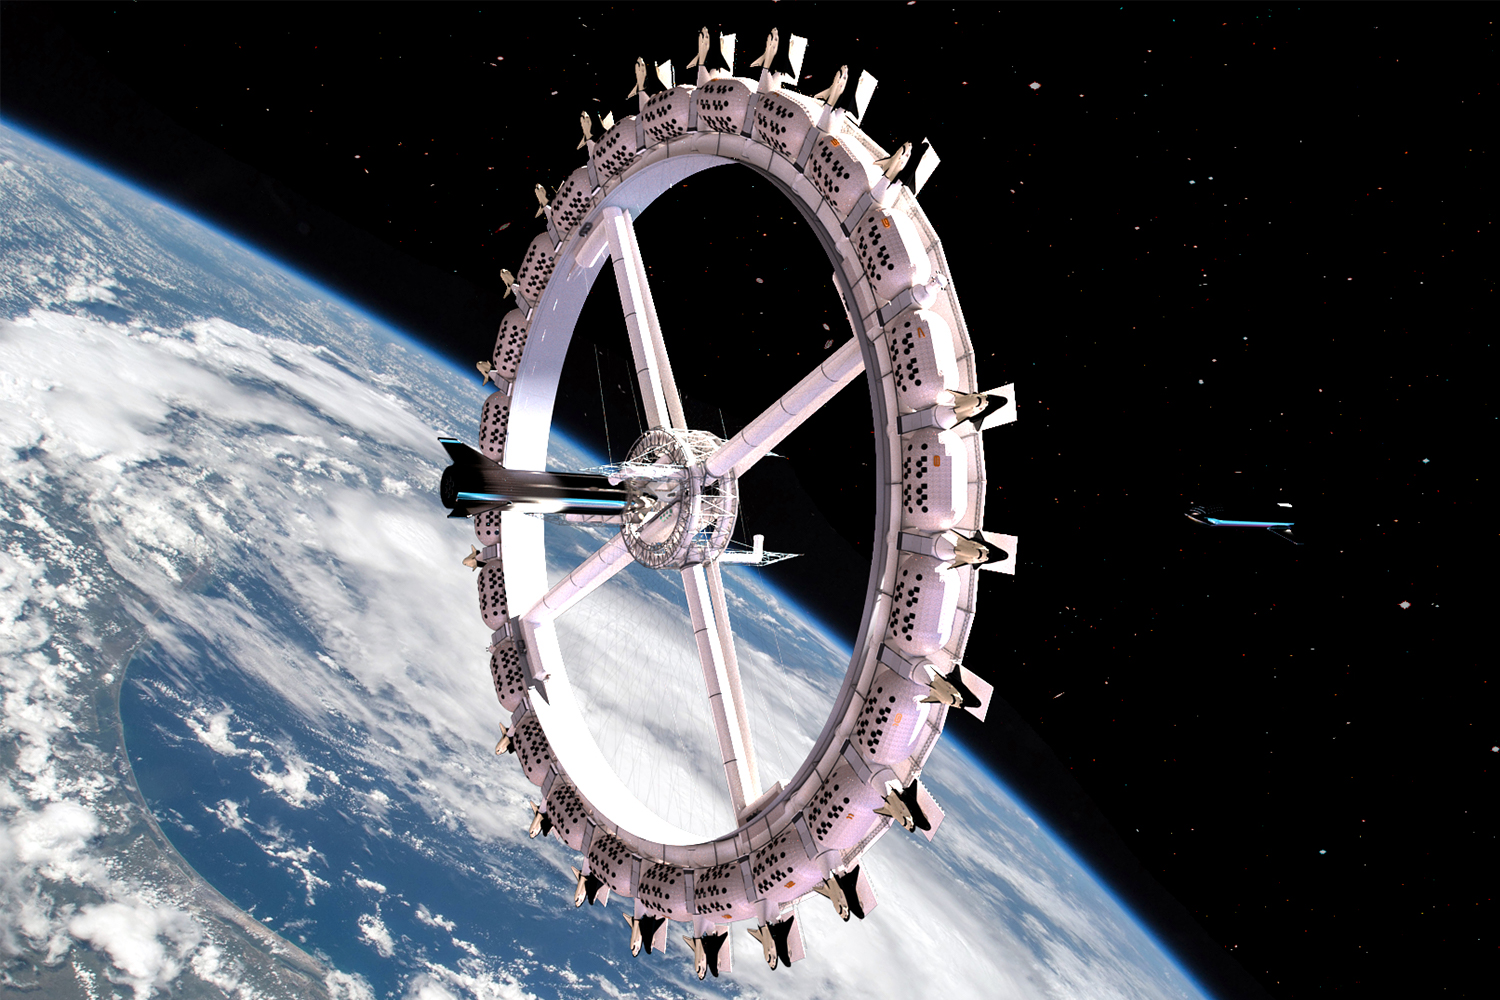 A rendering of the Voyager Station space hotel from space tourism company Orbital Assembly